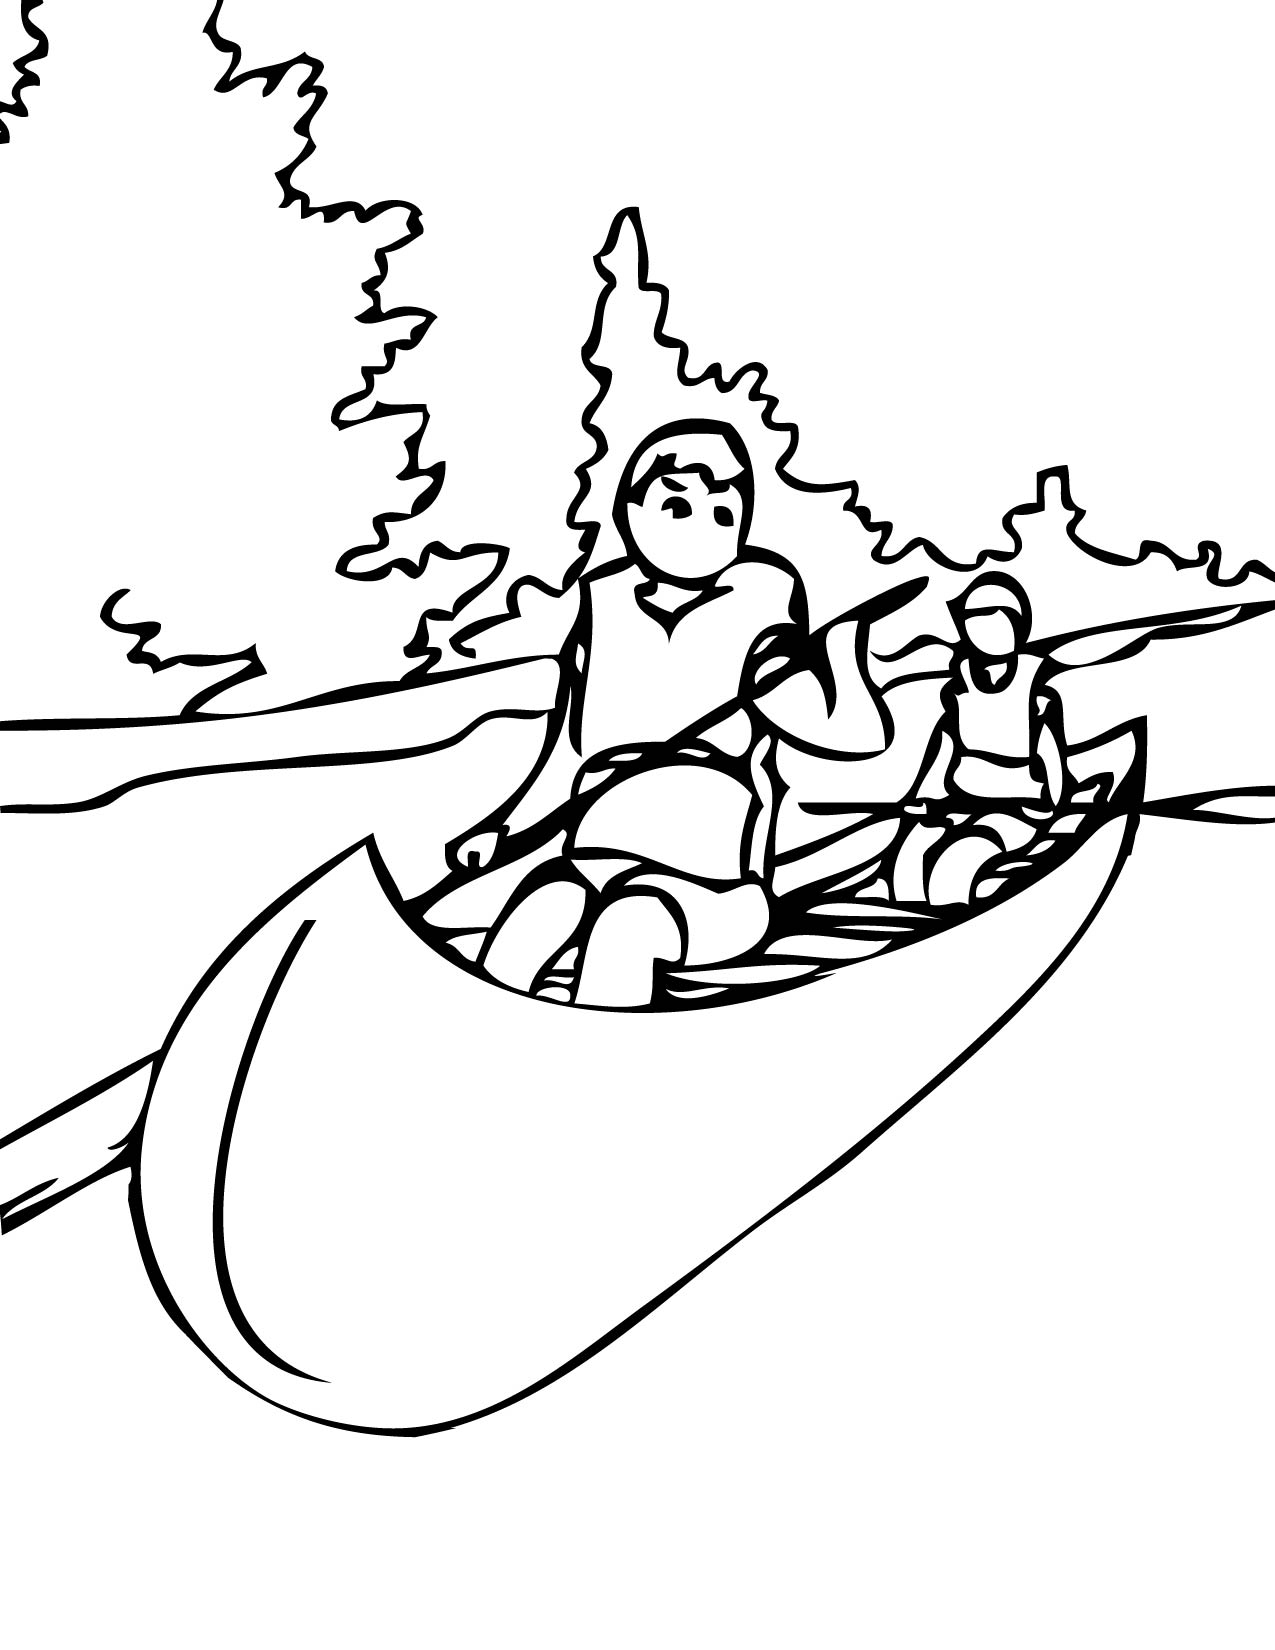 Canoing Coloring Pages